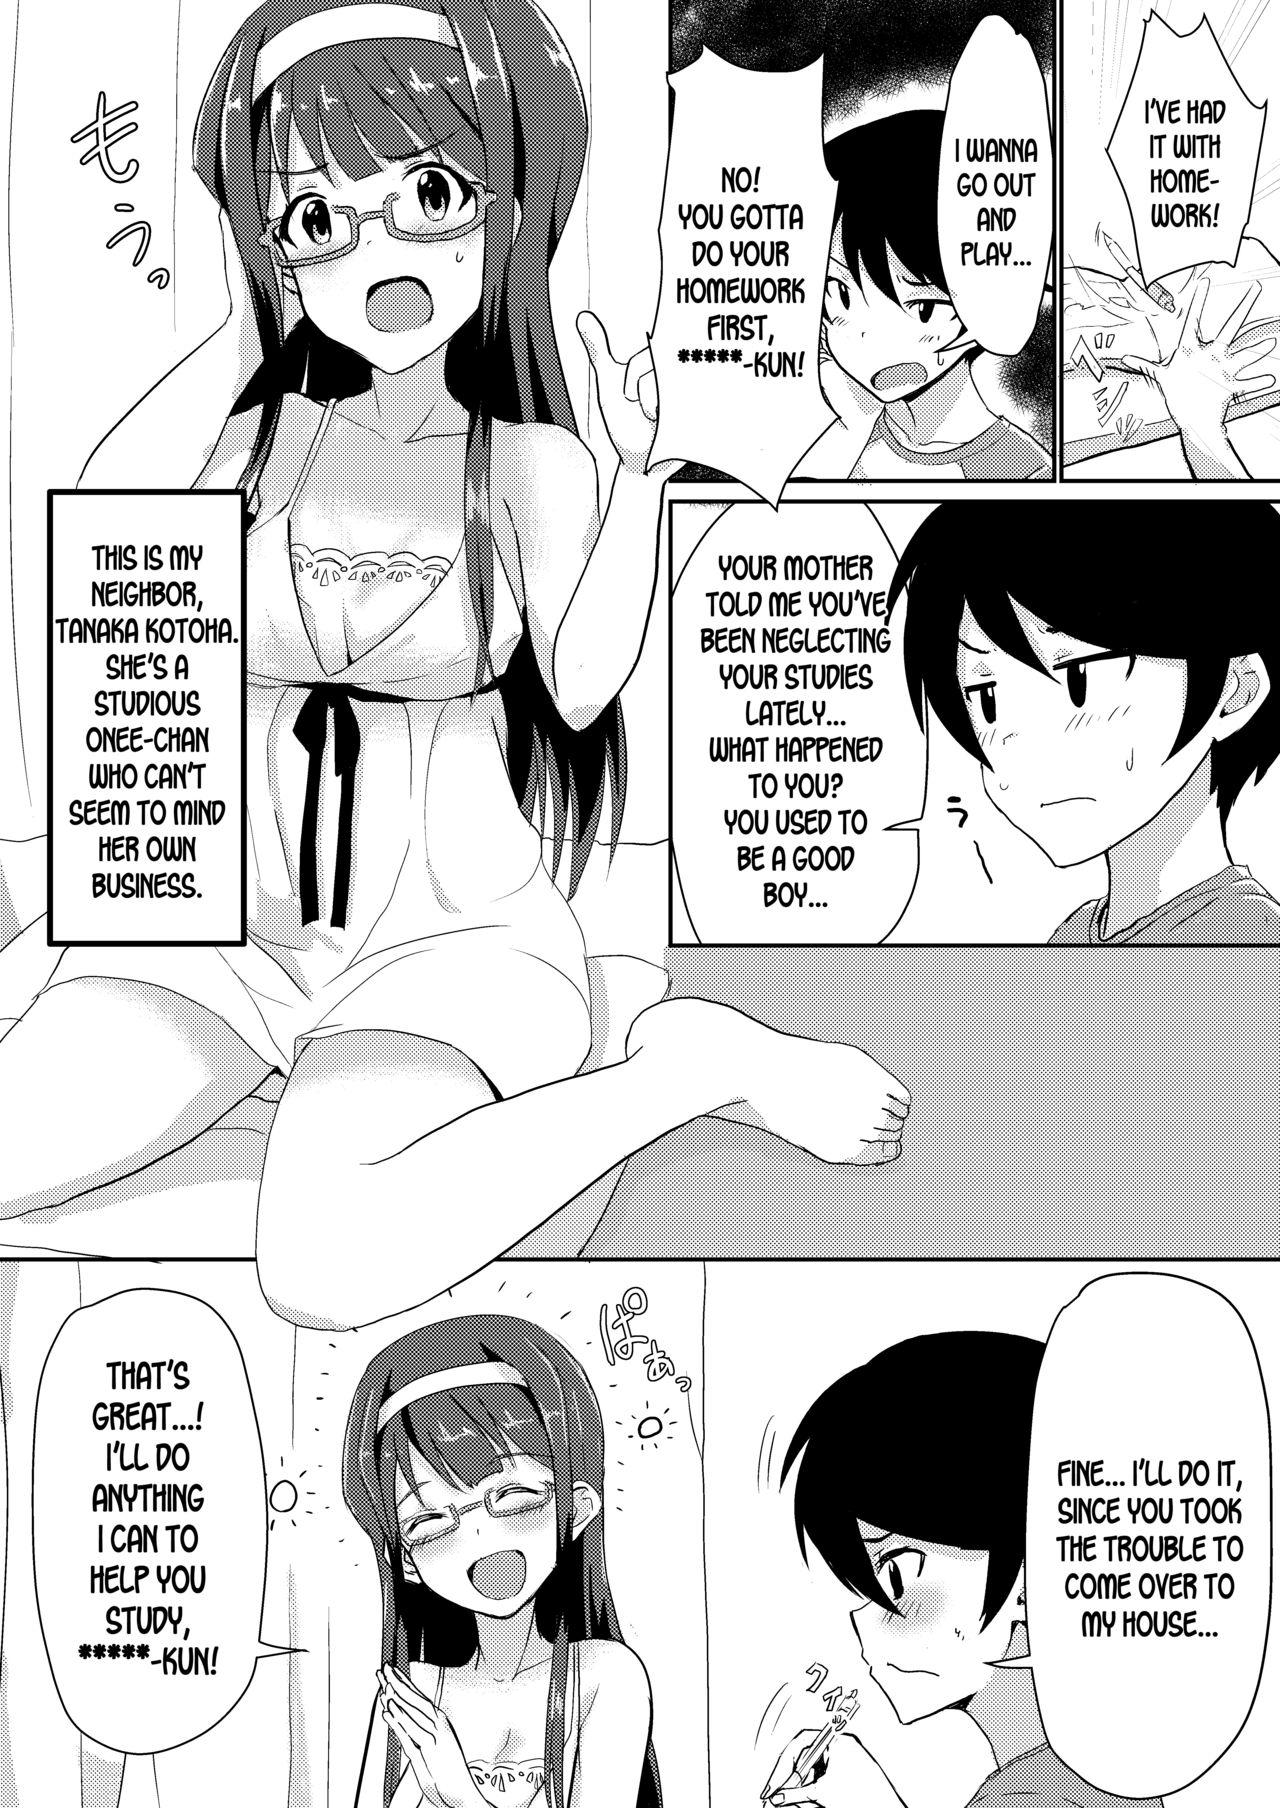 Jerking HOME WORK - The idolmaster Gag - Page 2